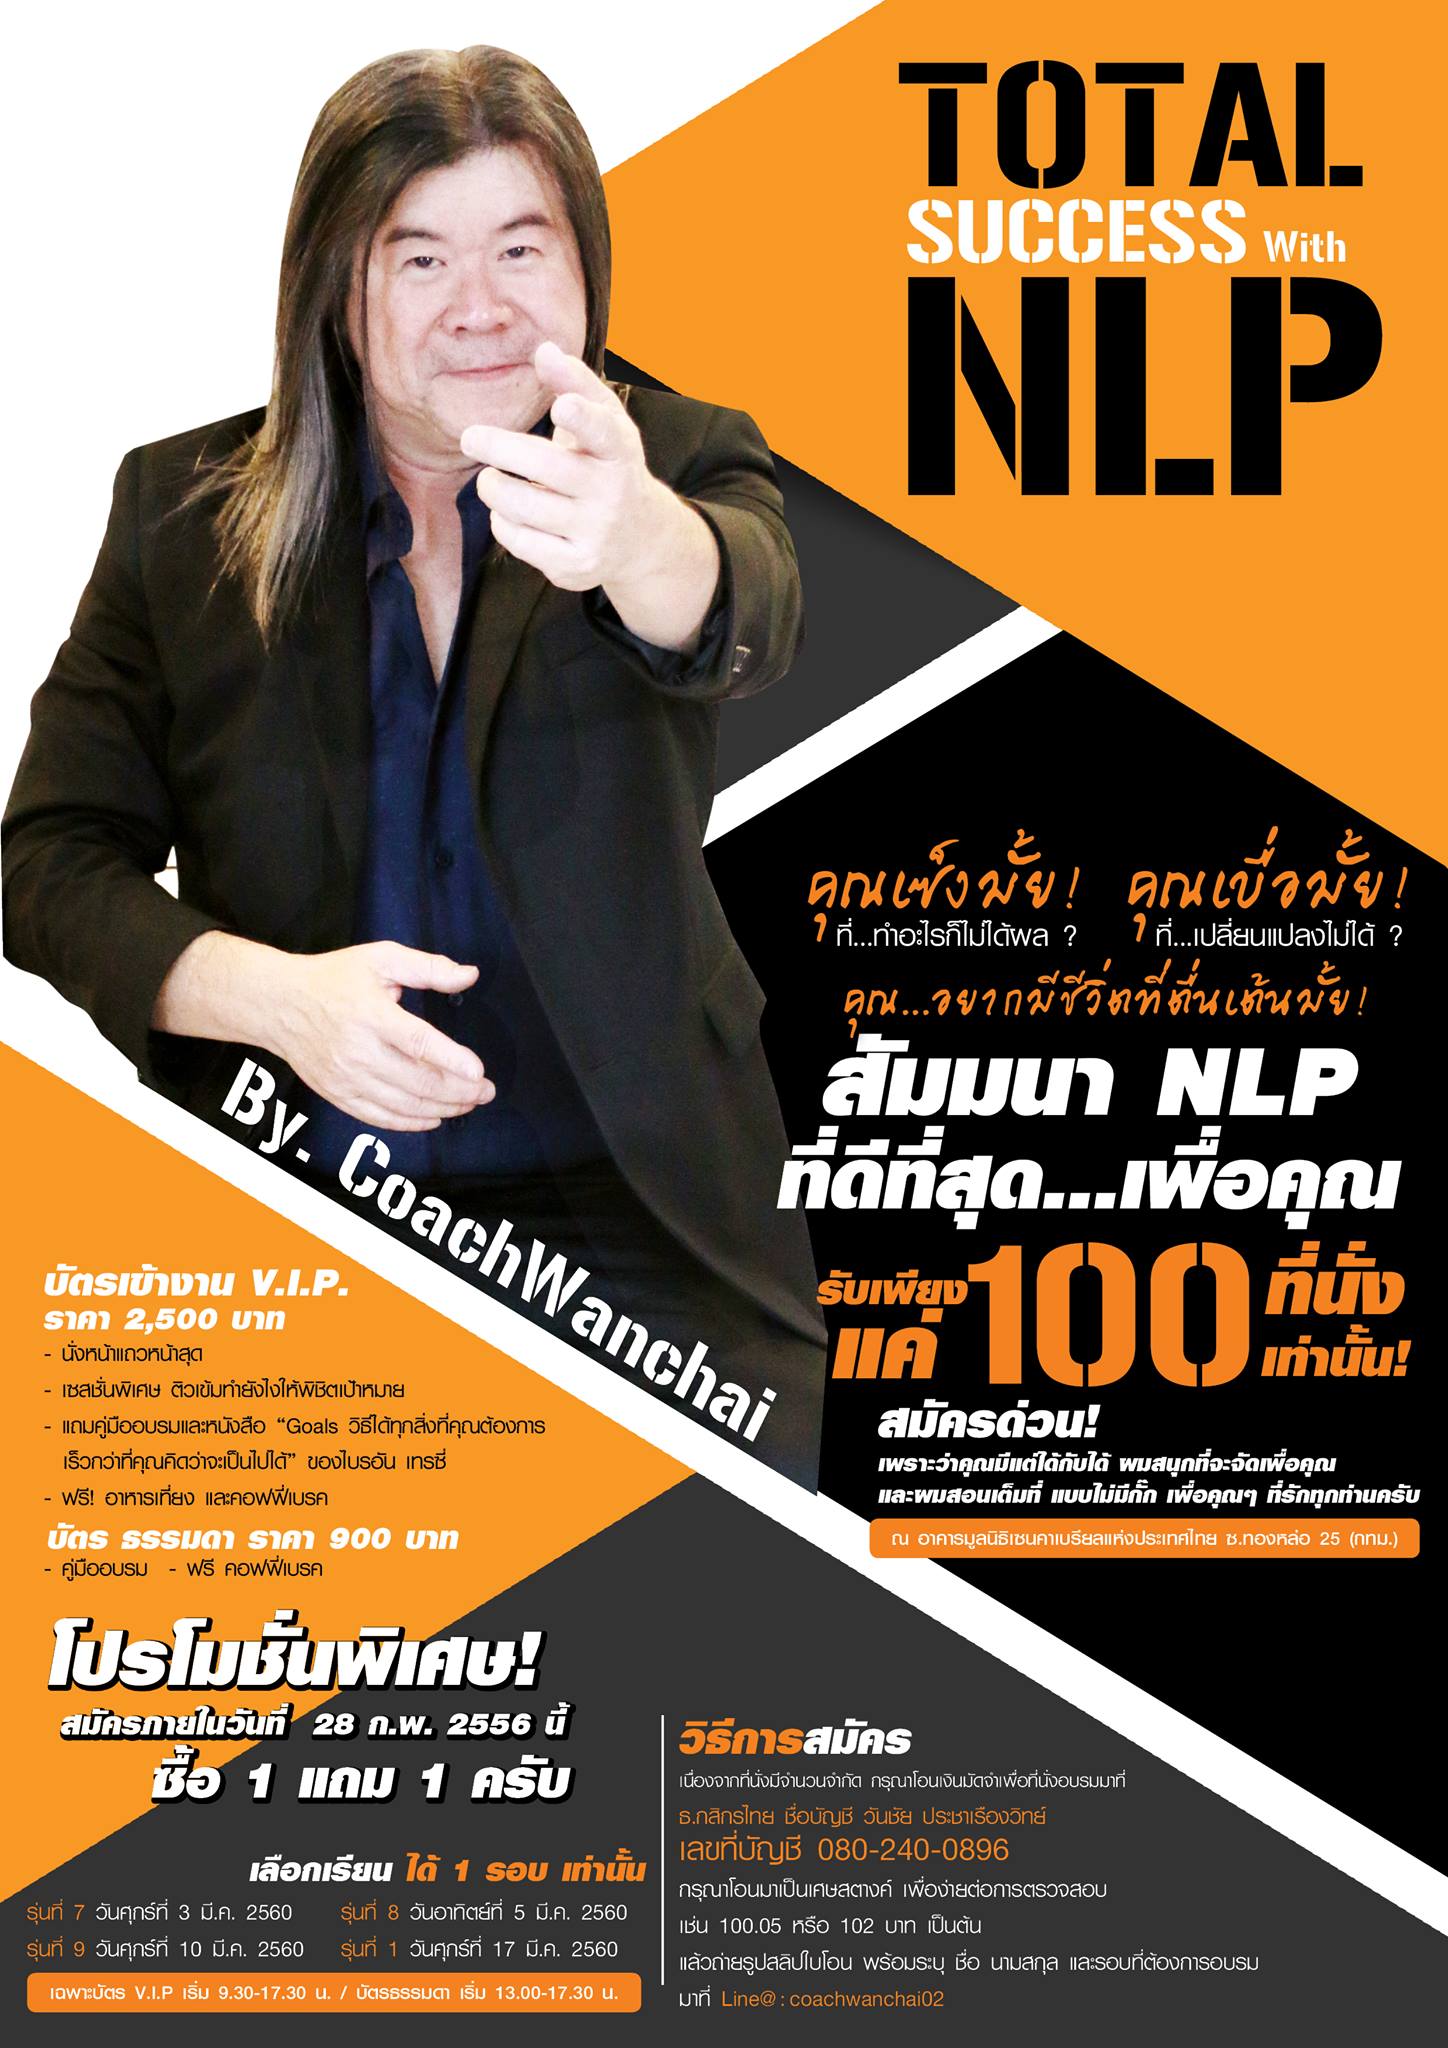 Total Success With NLP